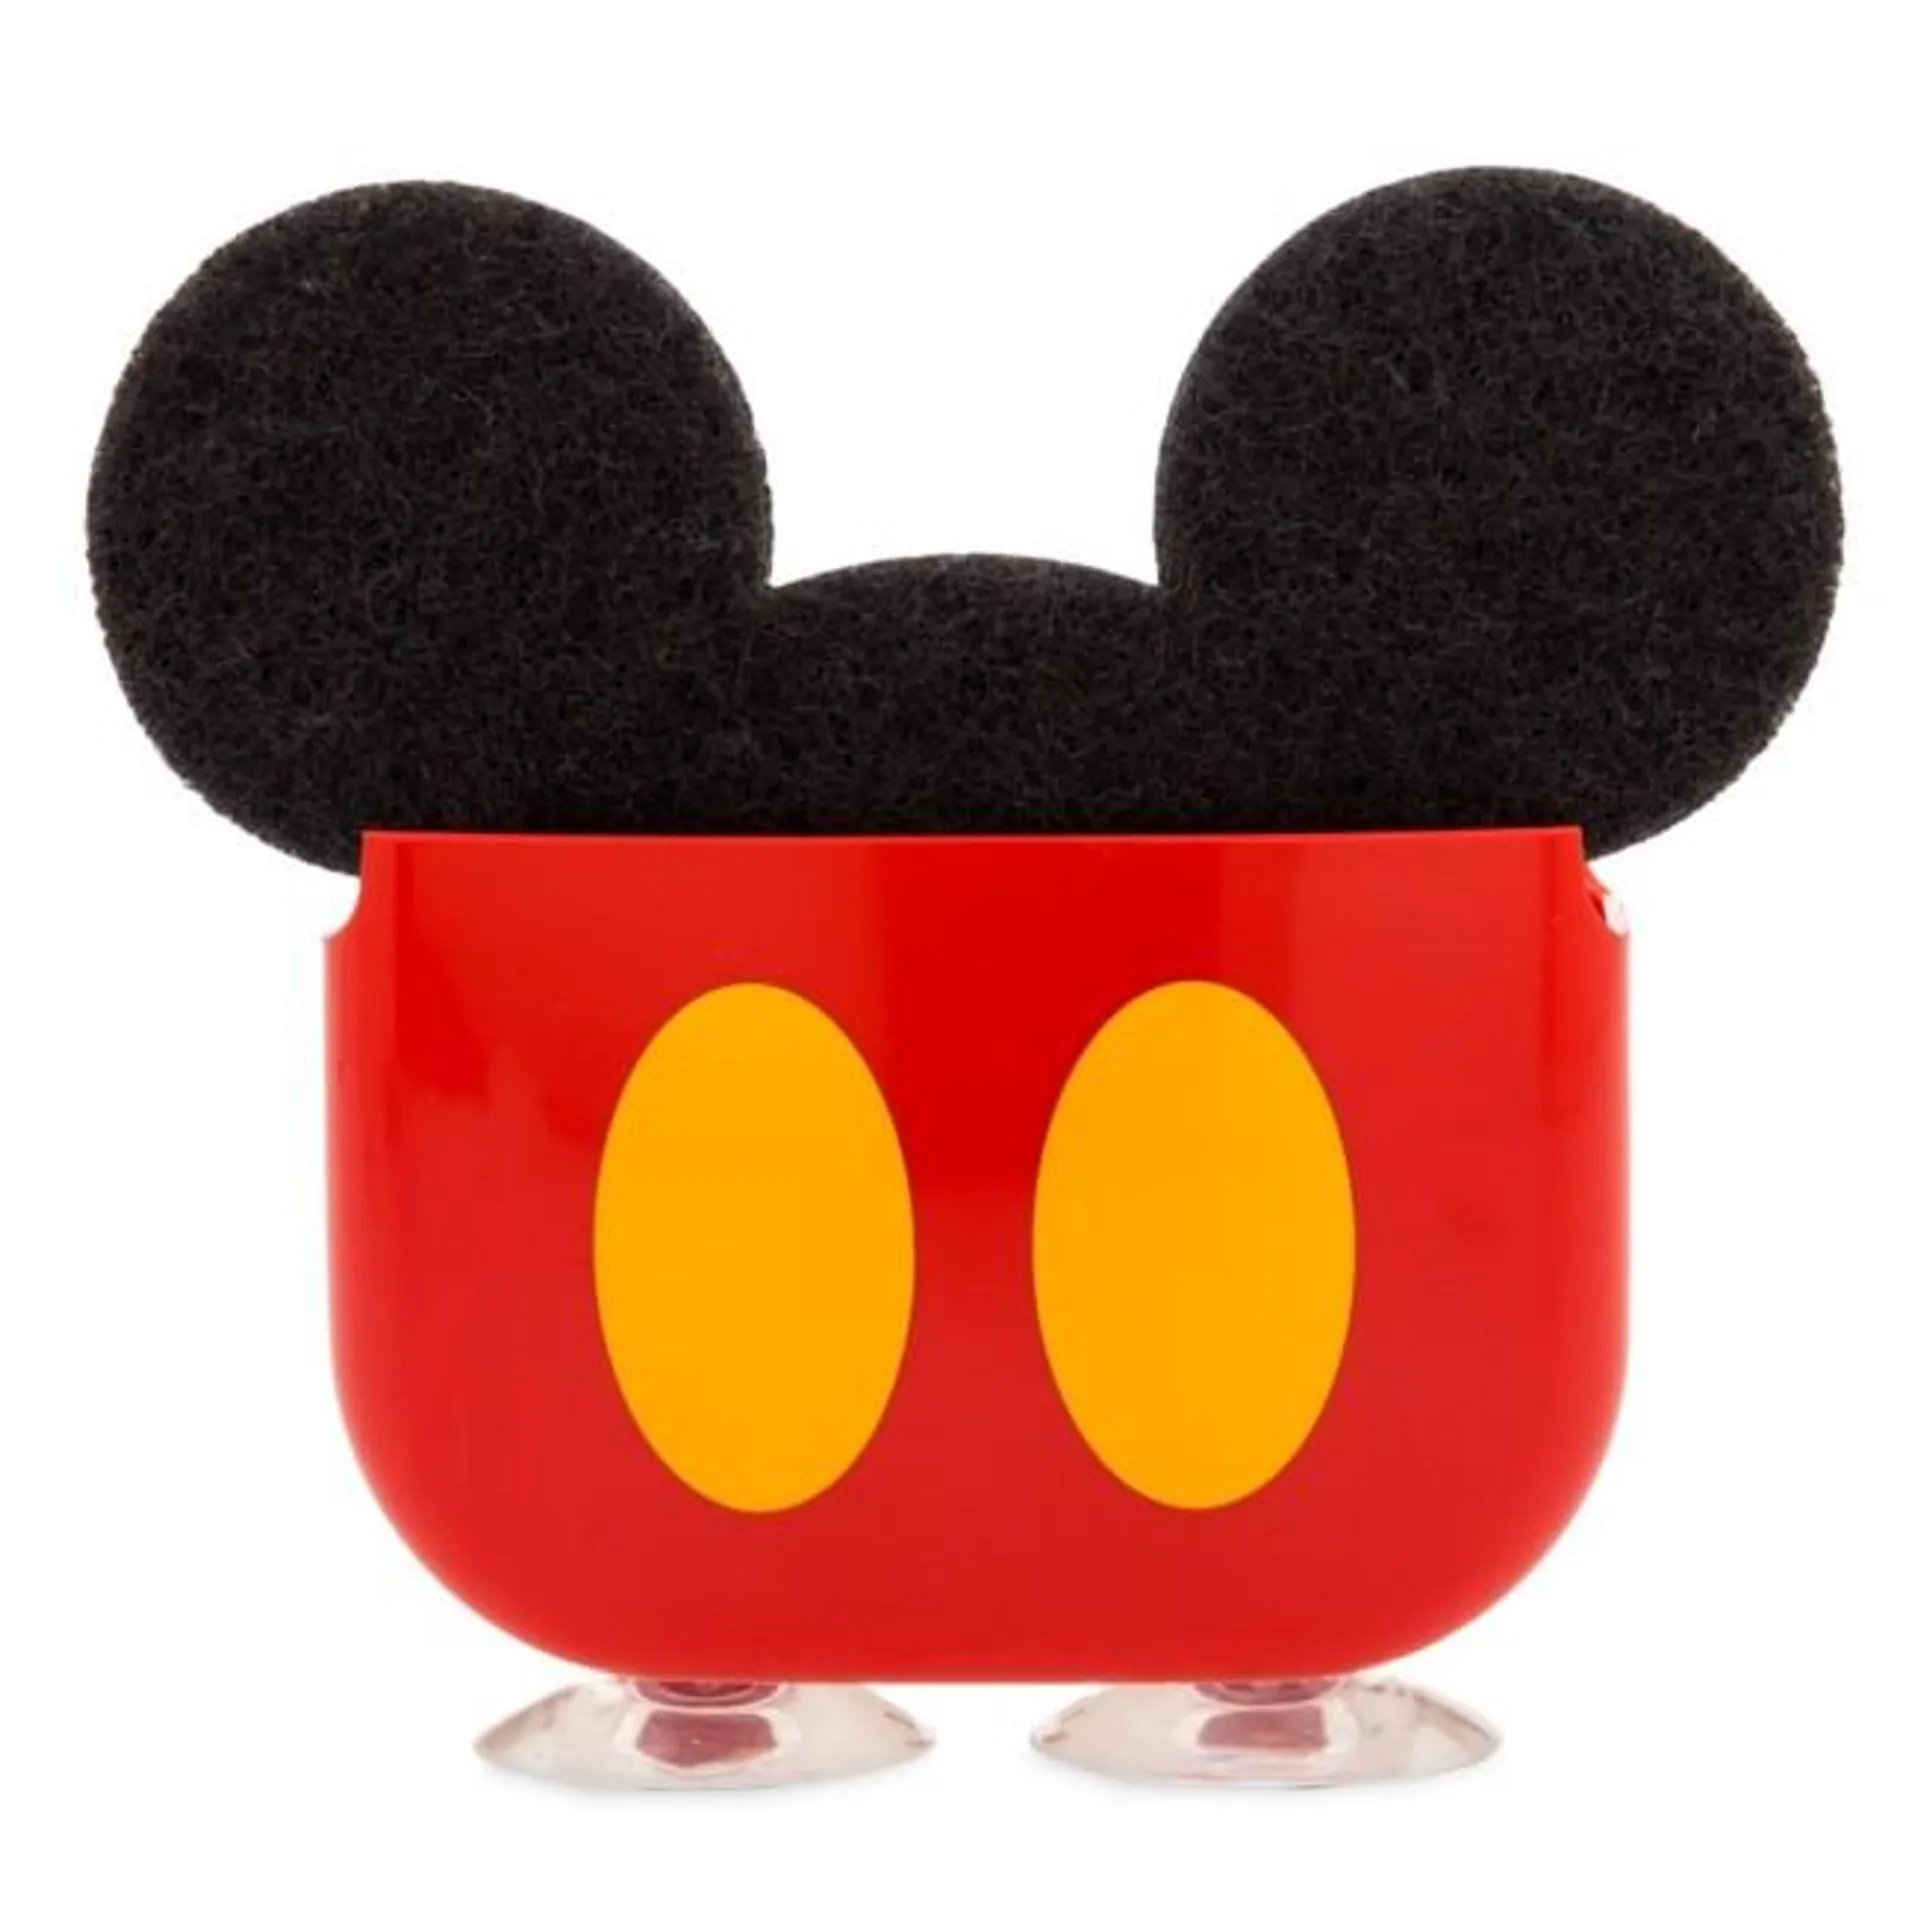 Mickey Mouse Kitchen Sponge and Holder